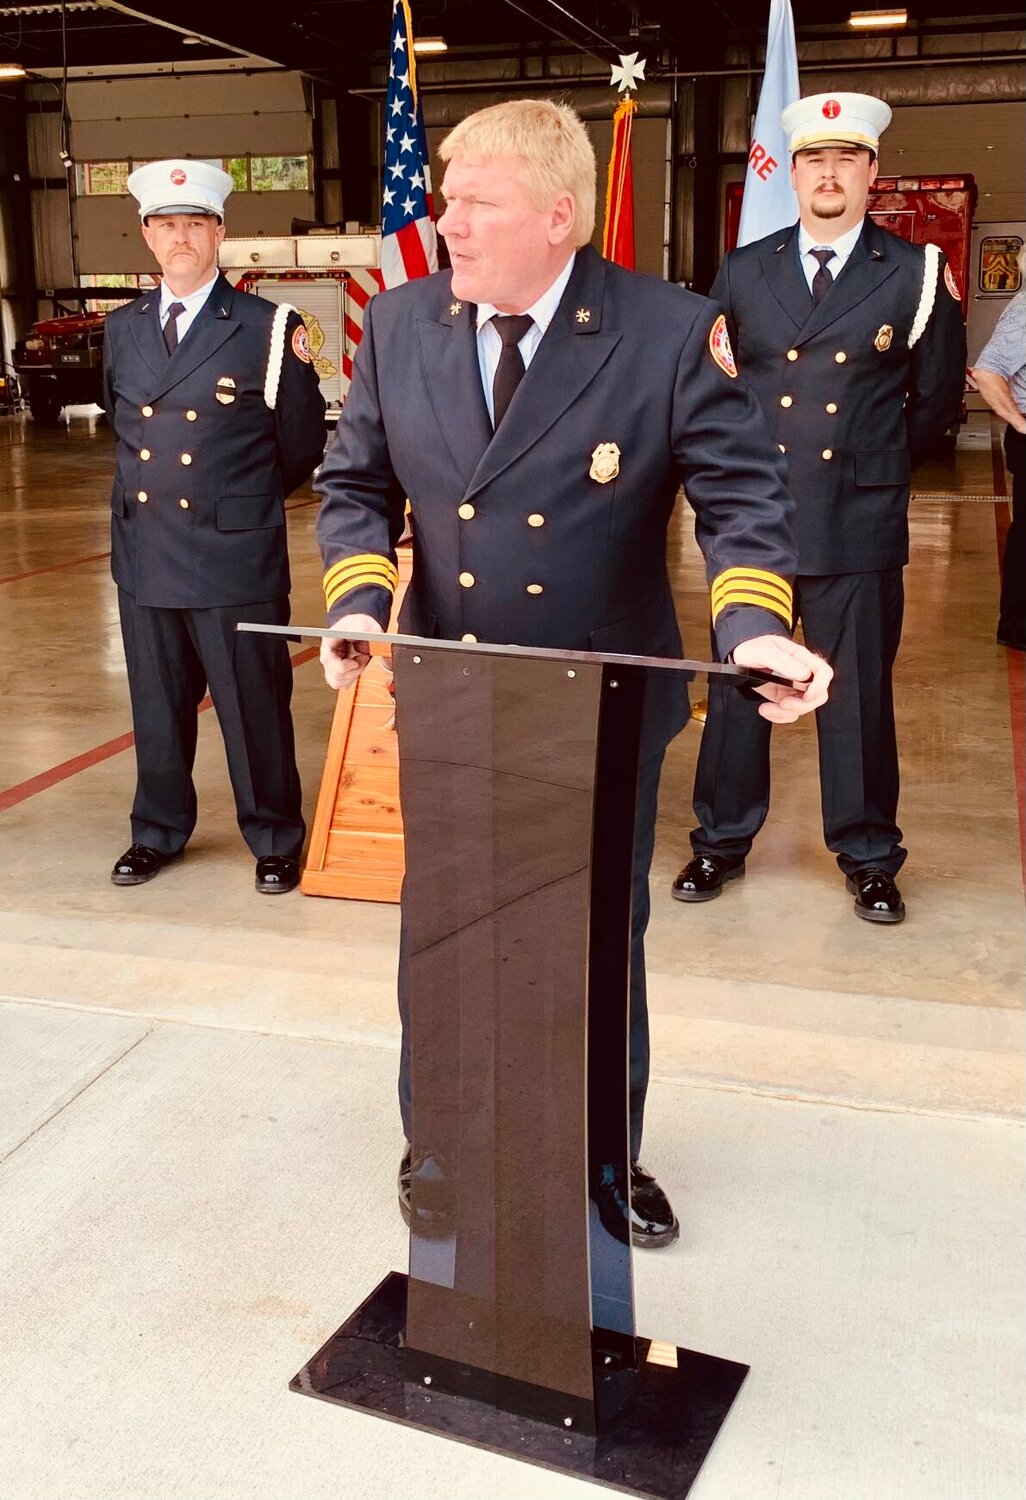 Ron Lemley, a Battalion Chief at the Harrison Fire Department, gave the welcoming remarks to the large group of people who attended the 9/11 Ceremony at the Harrison Fire Station Monday morning. Behind Lemley are Lt. Lindsey Harp (left) and Lt. Seth Estes. They are members of the Harrison Fire Department’s Honor Guard. CONTRIBUTED PHOTO/LEE H. DUNLAP